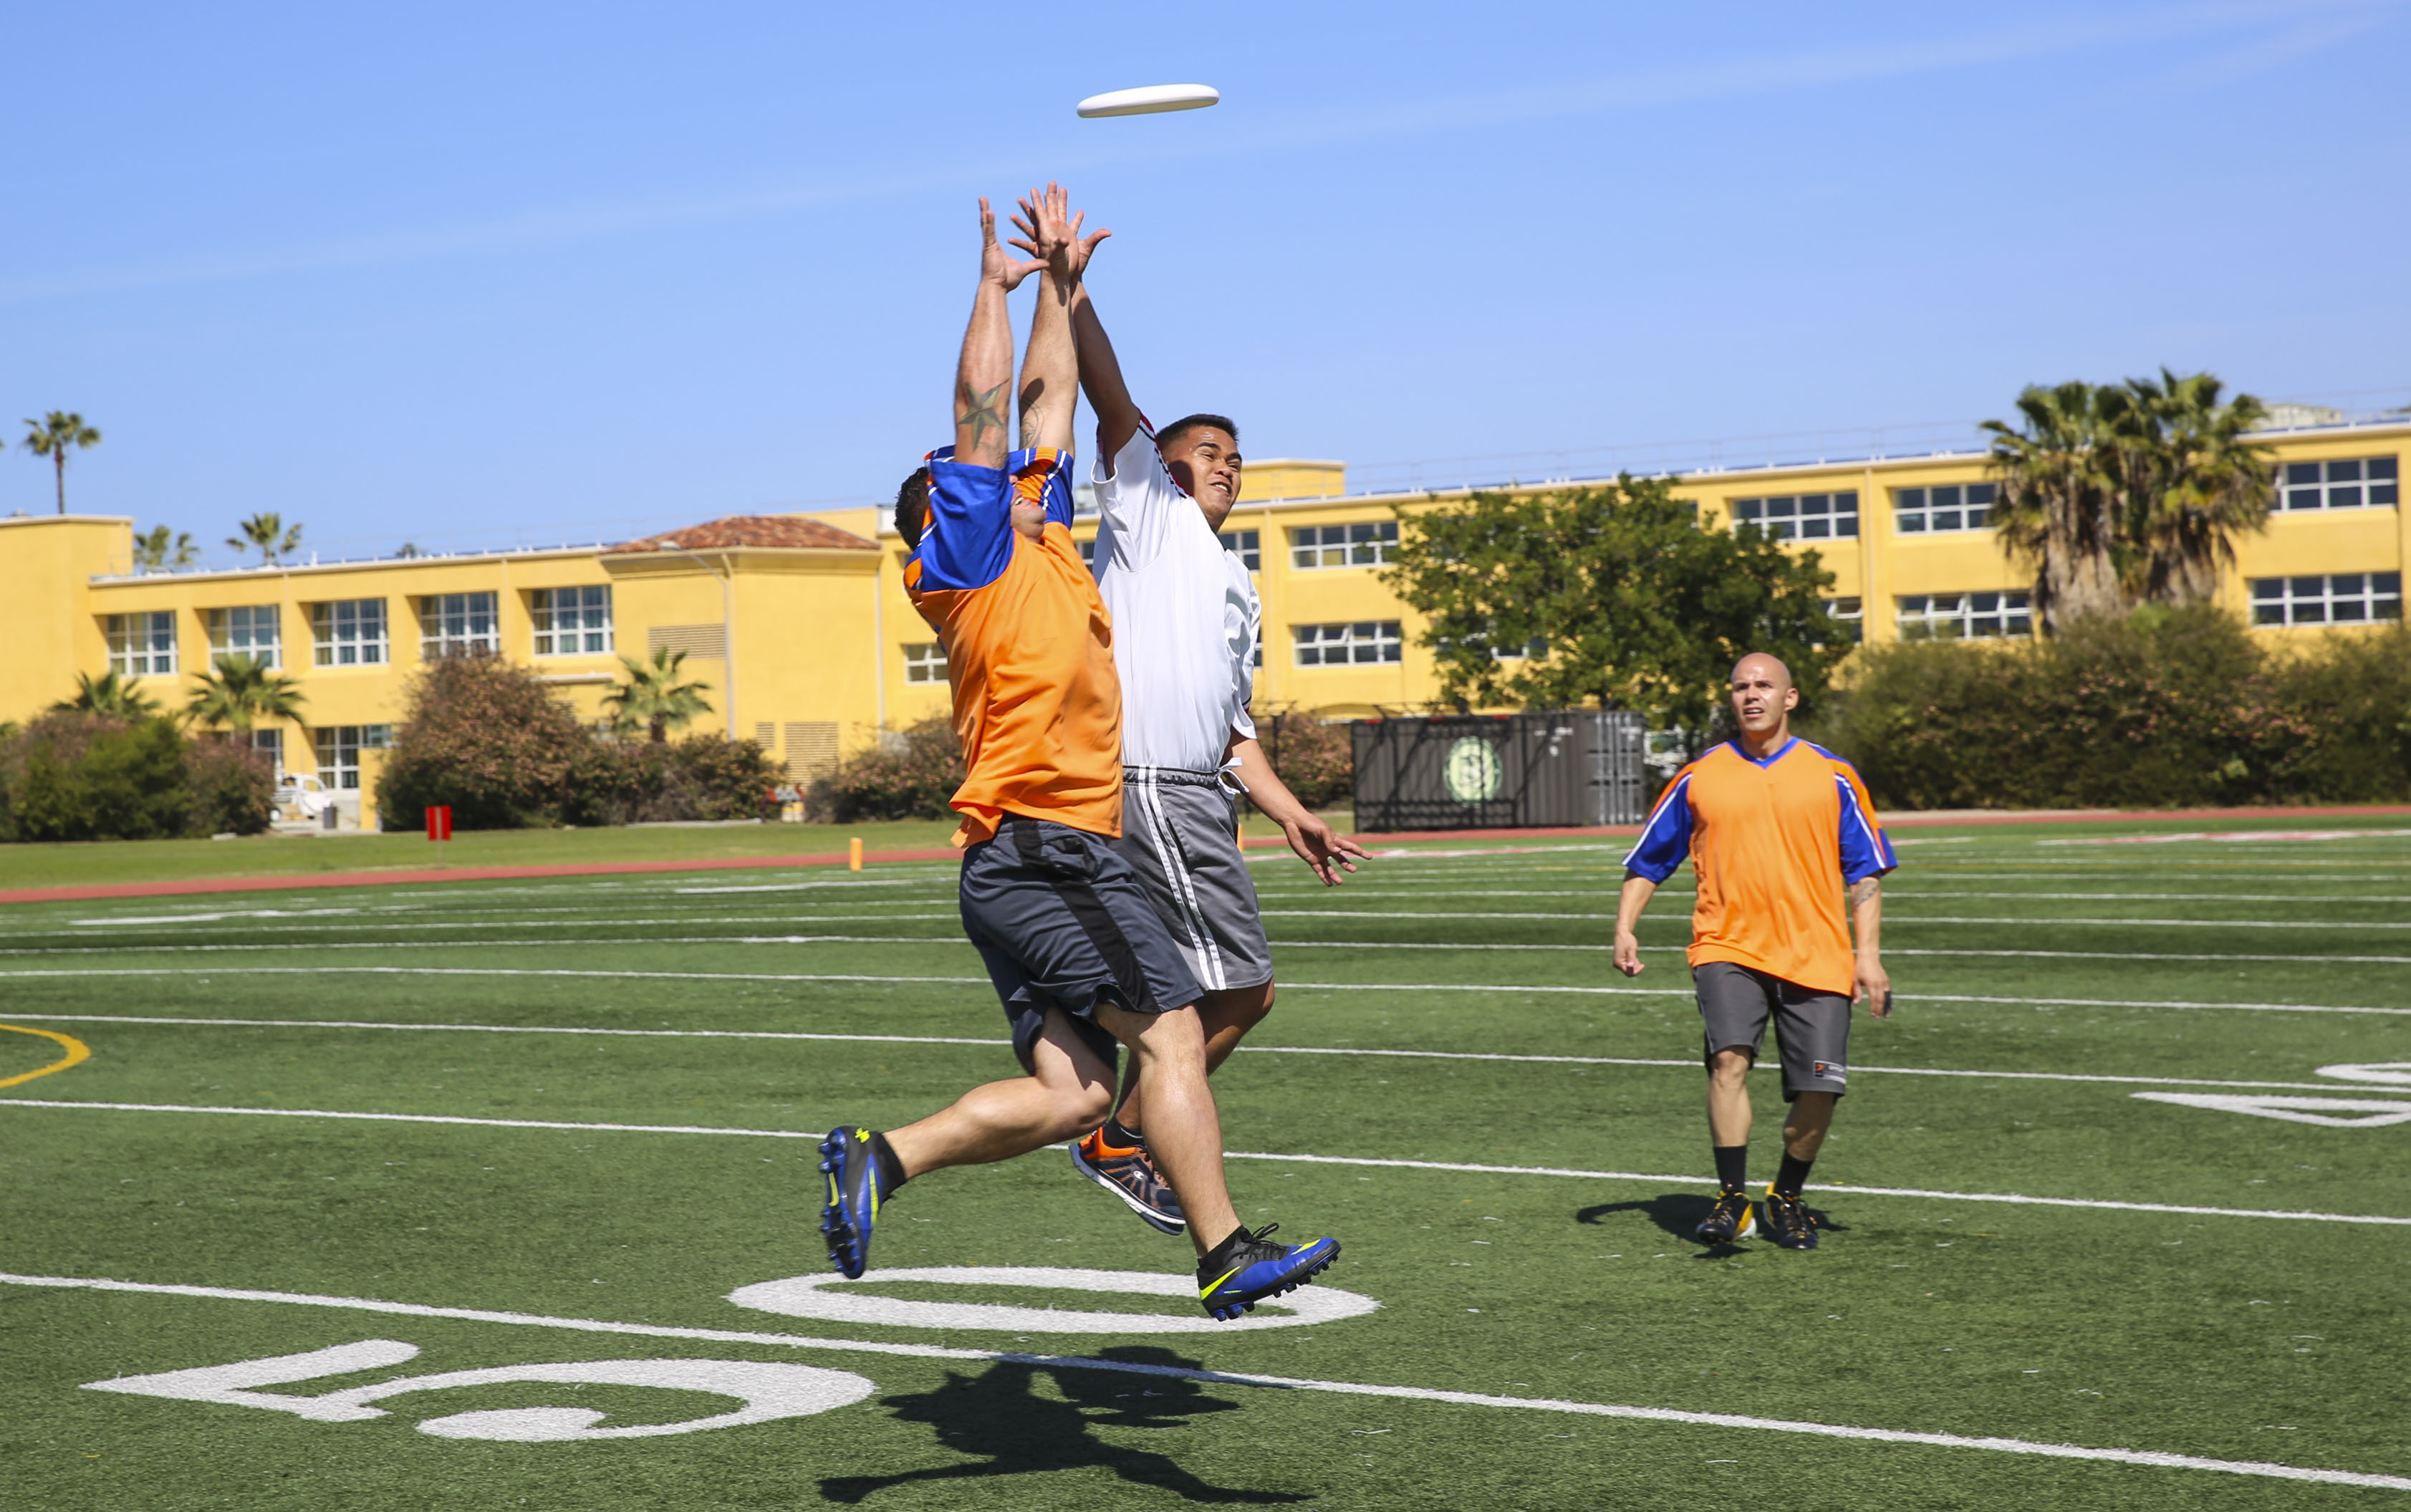 15 Minute Ultimate frisbee workout plan for Push Pull Legs